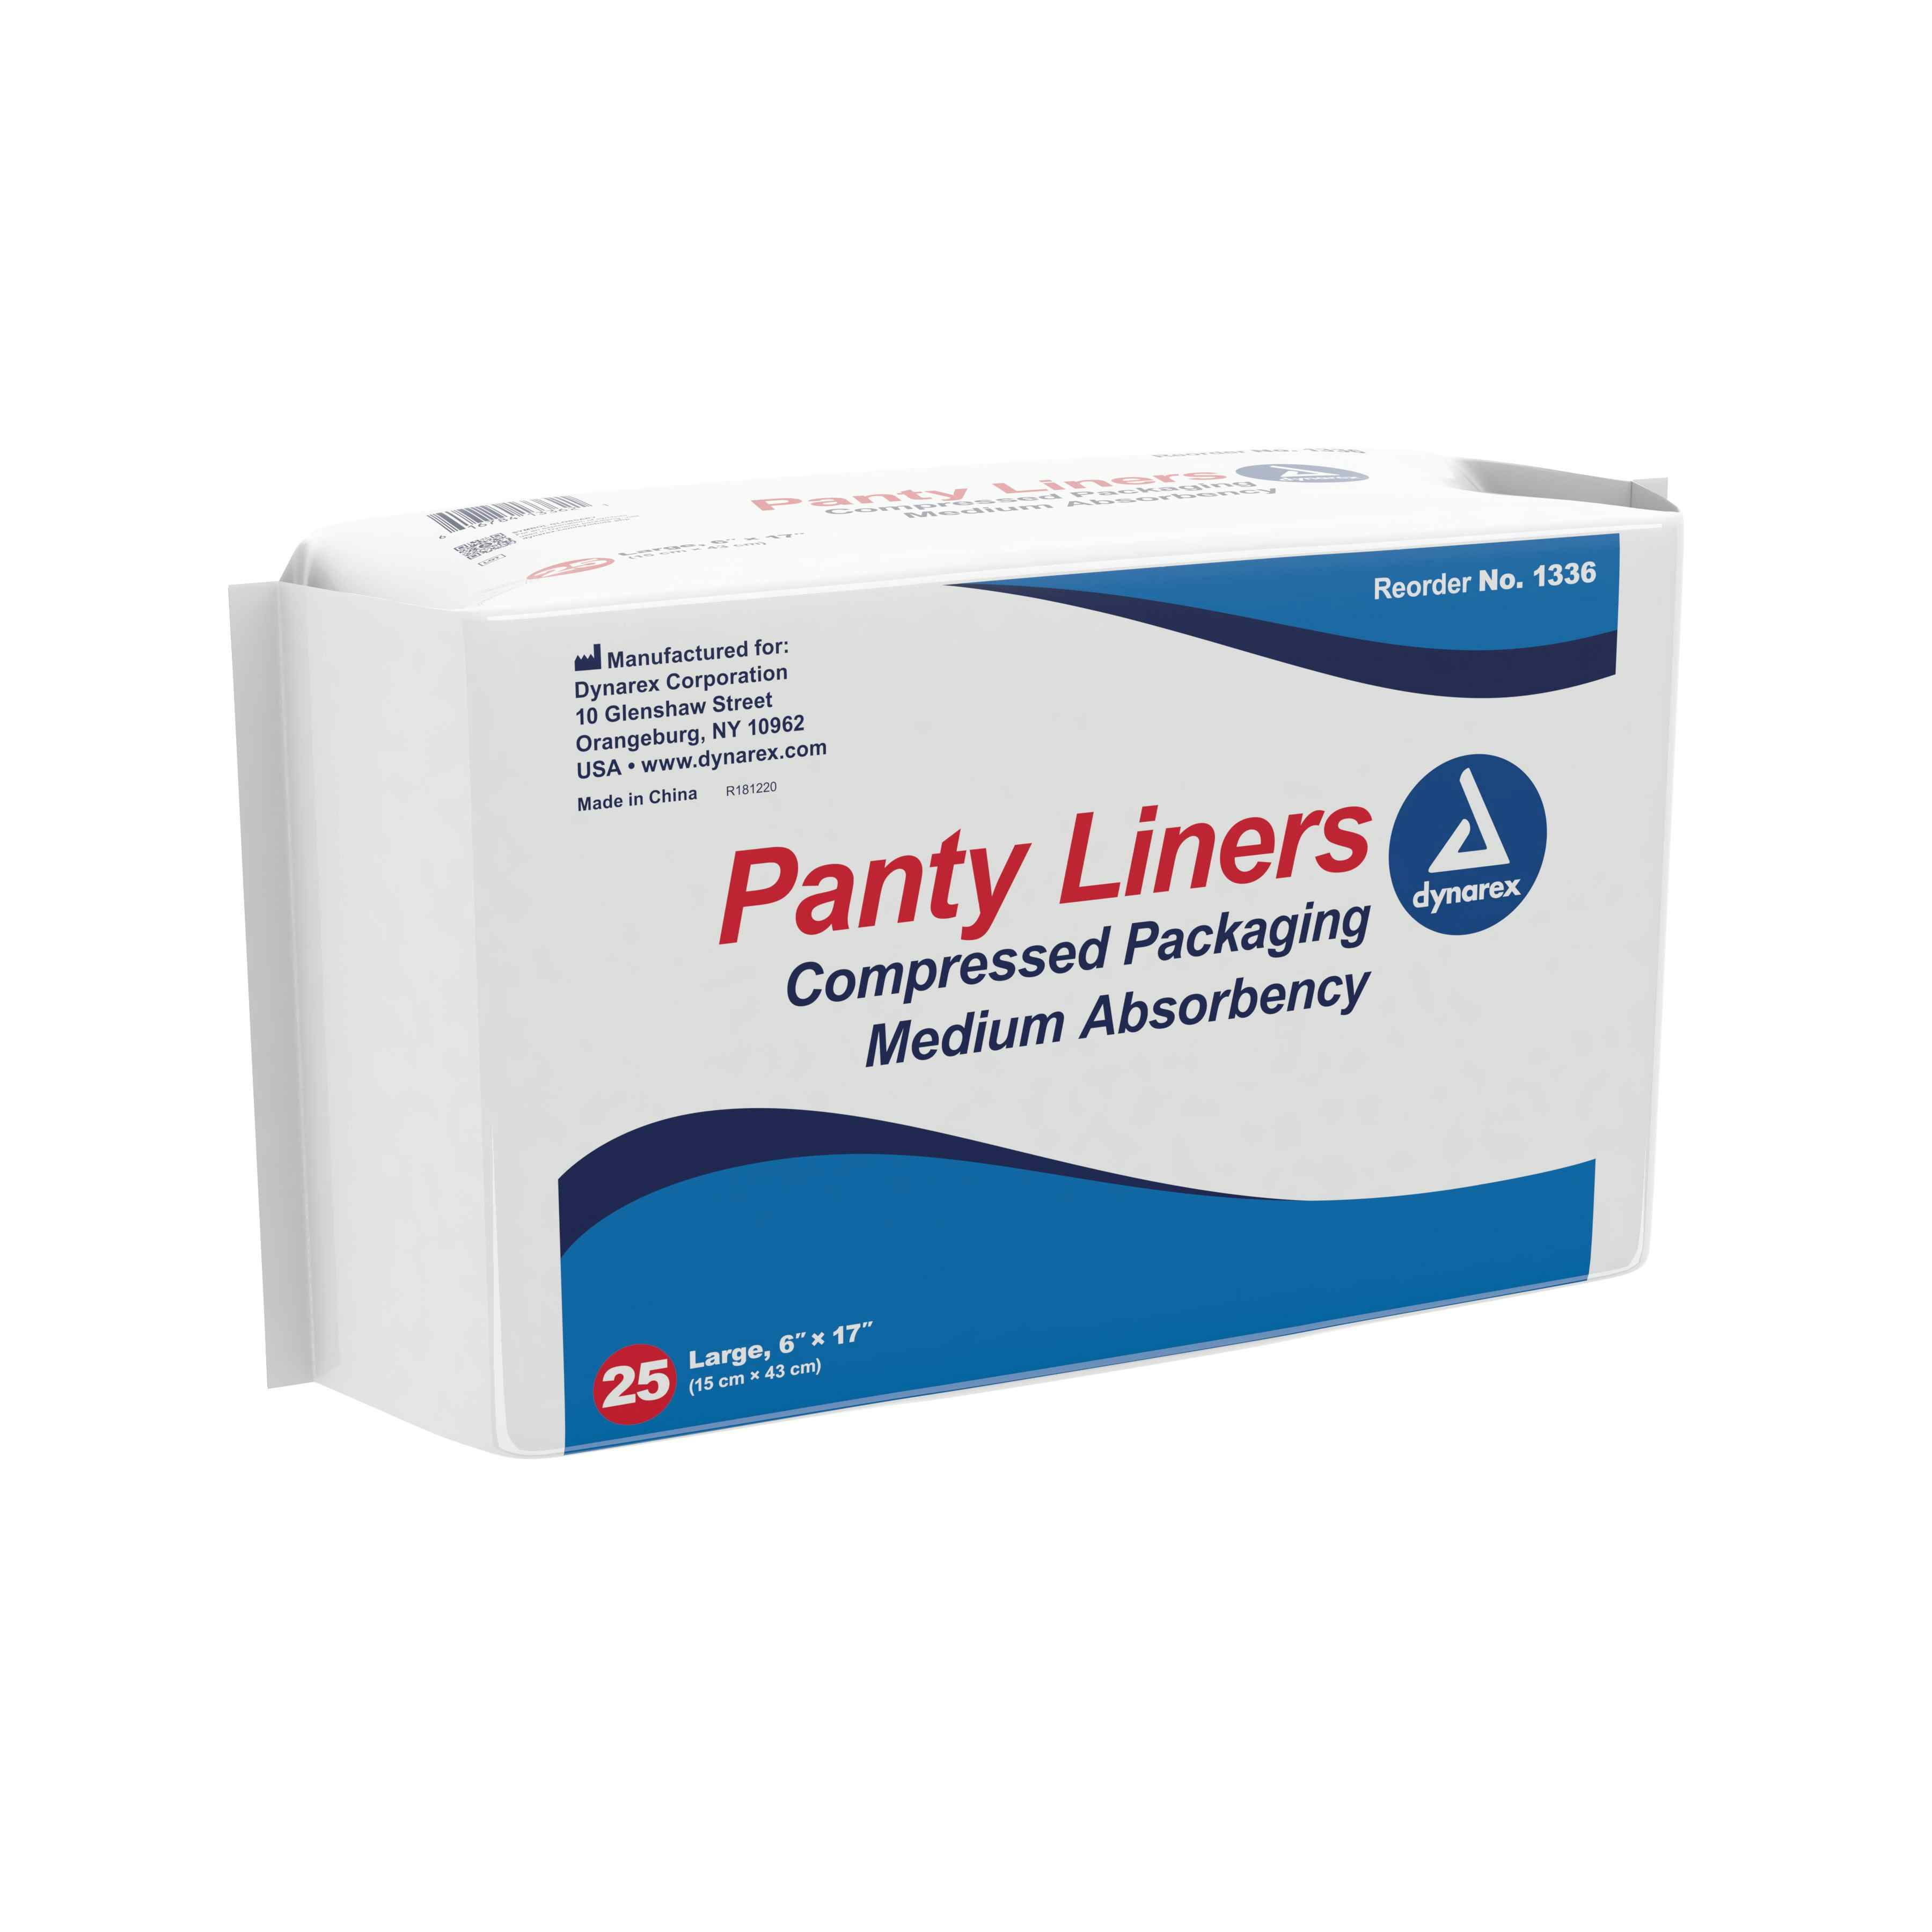 Dynarex Panty Liners, Moderate Absorbency, 1336, 6 X 17" - Case of 250 (10 Packs)